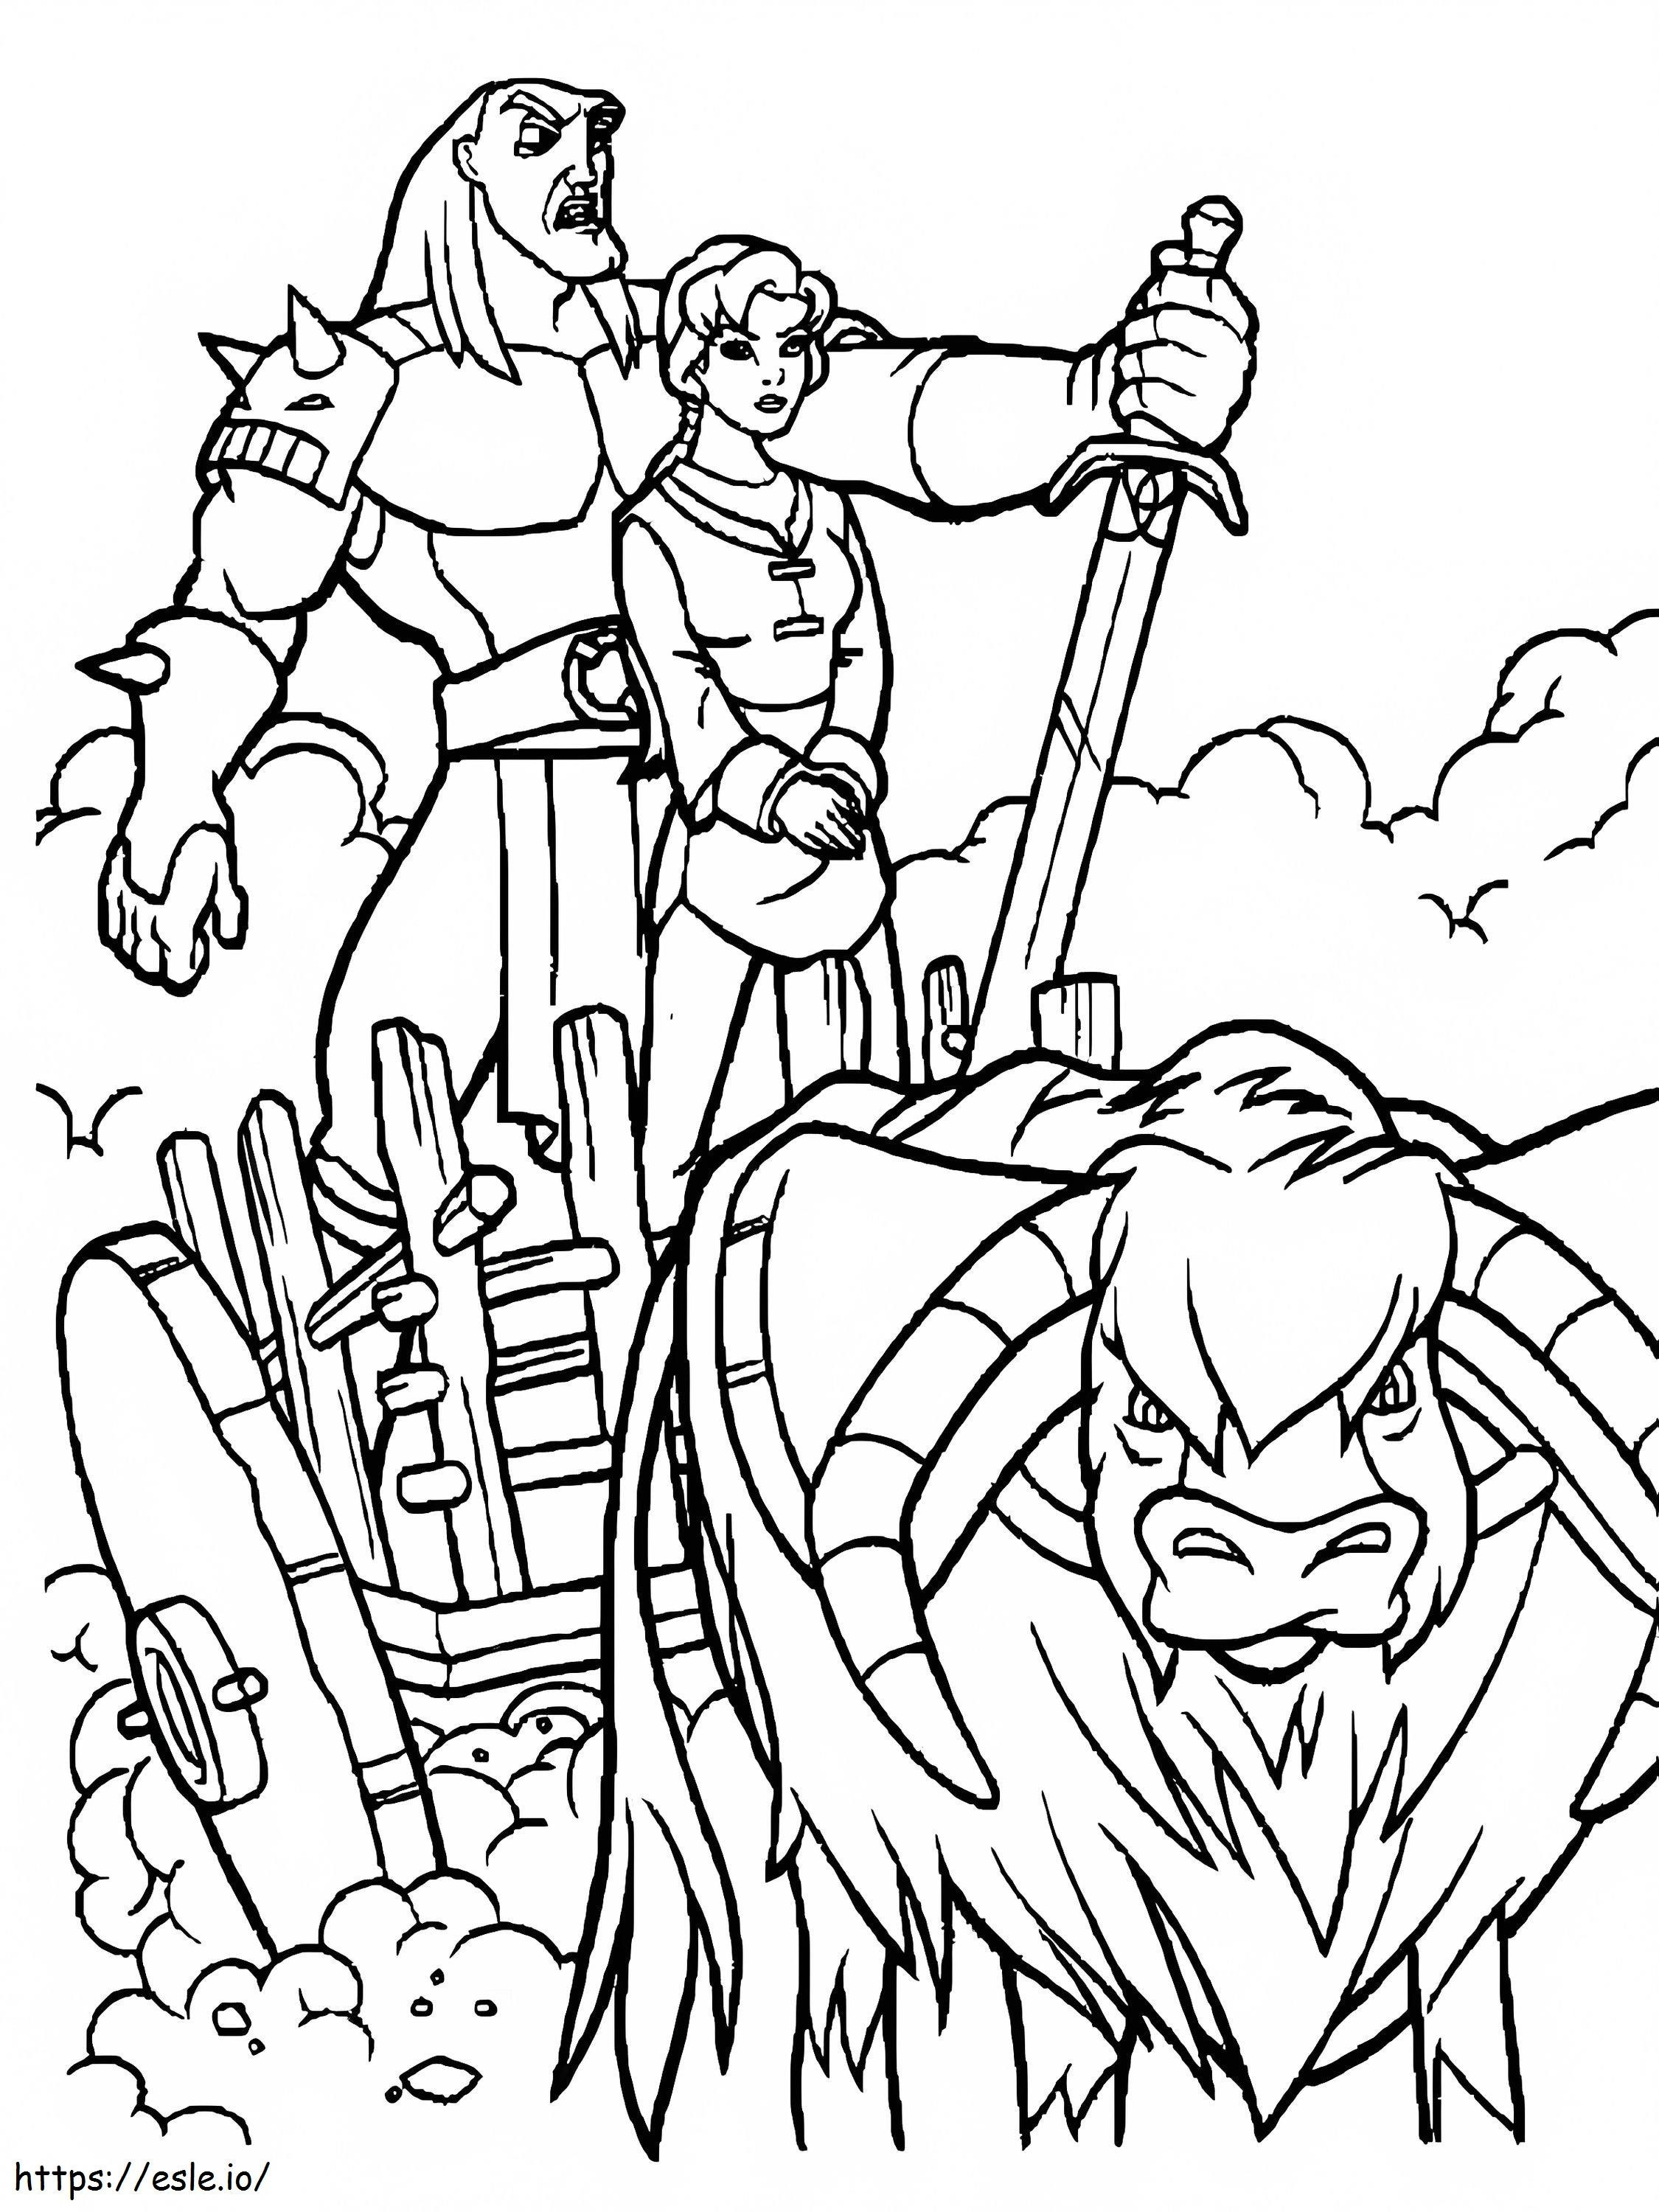 Quest For Camelot 2 coloring page